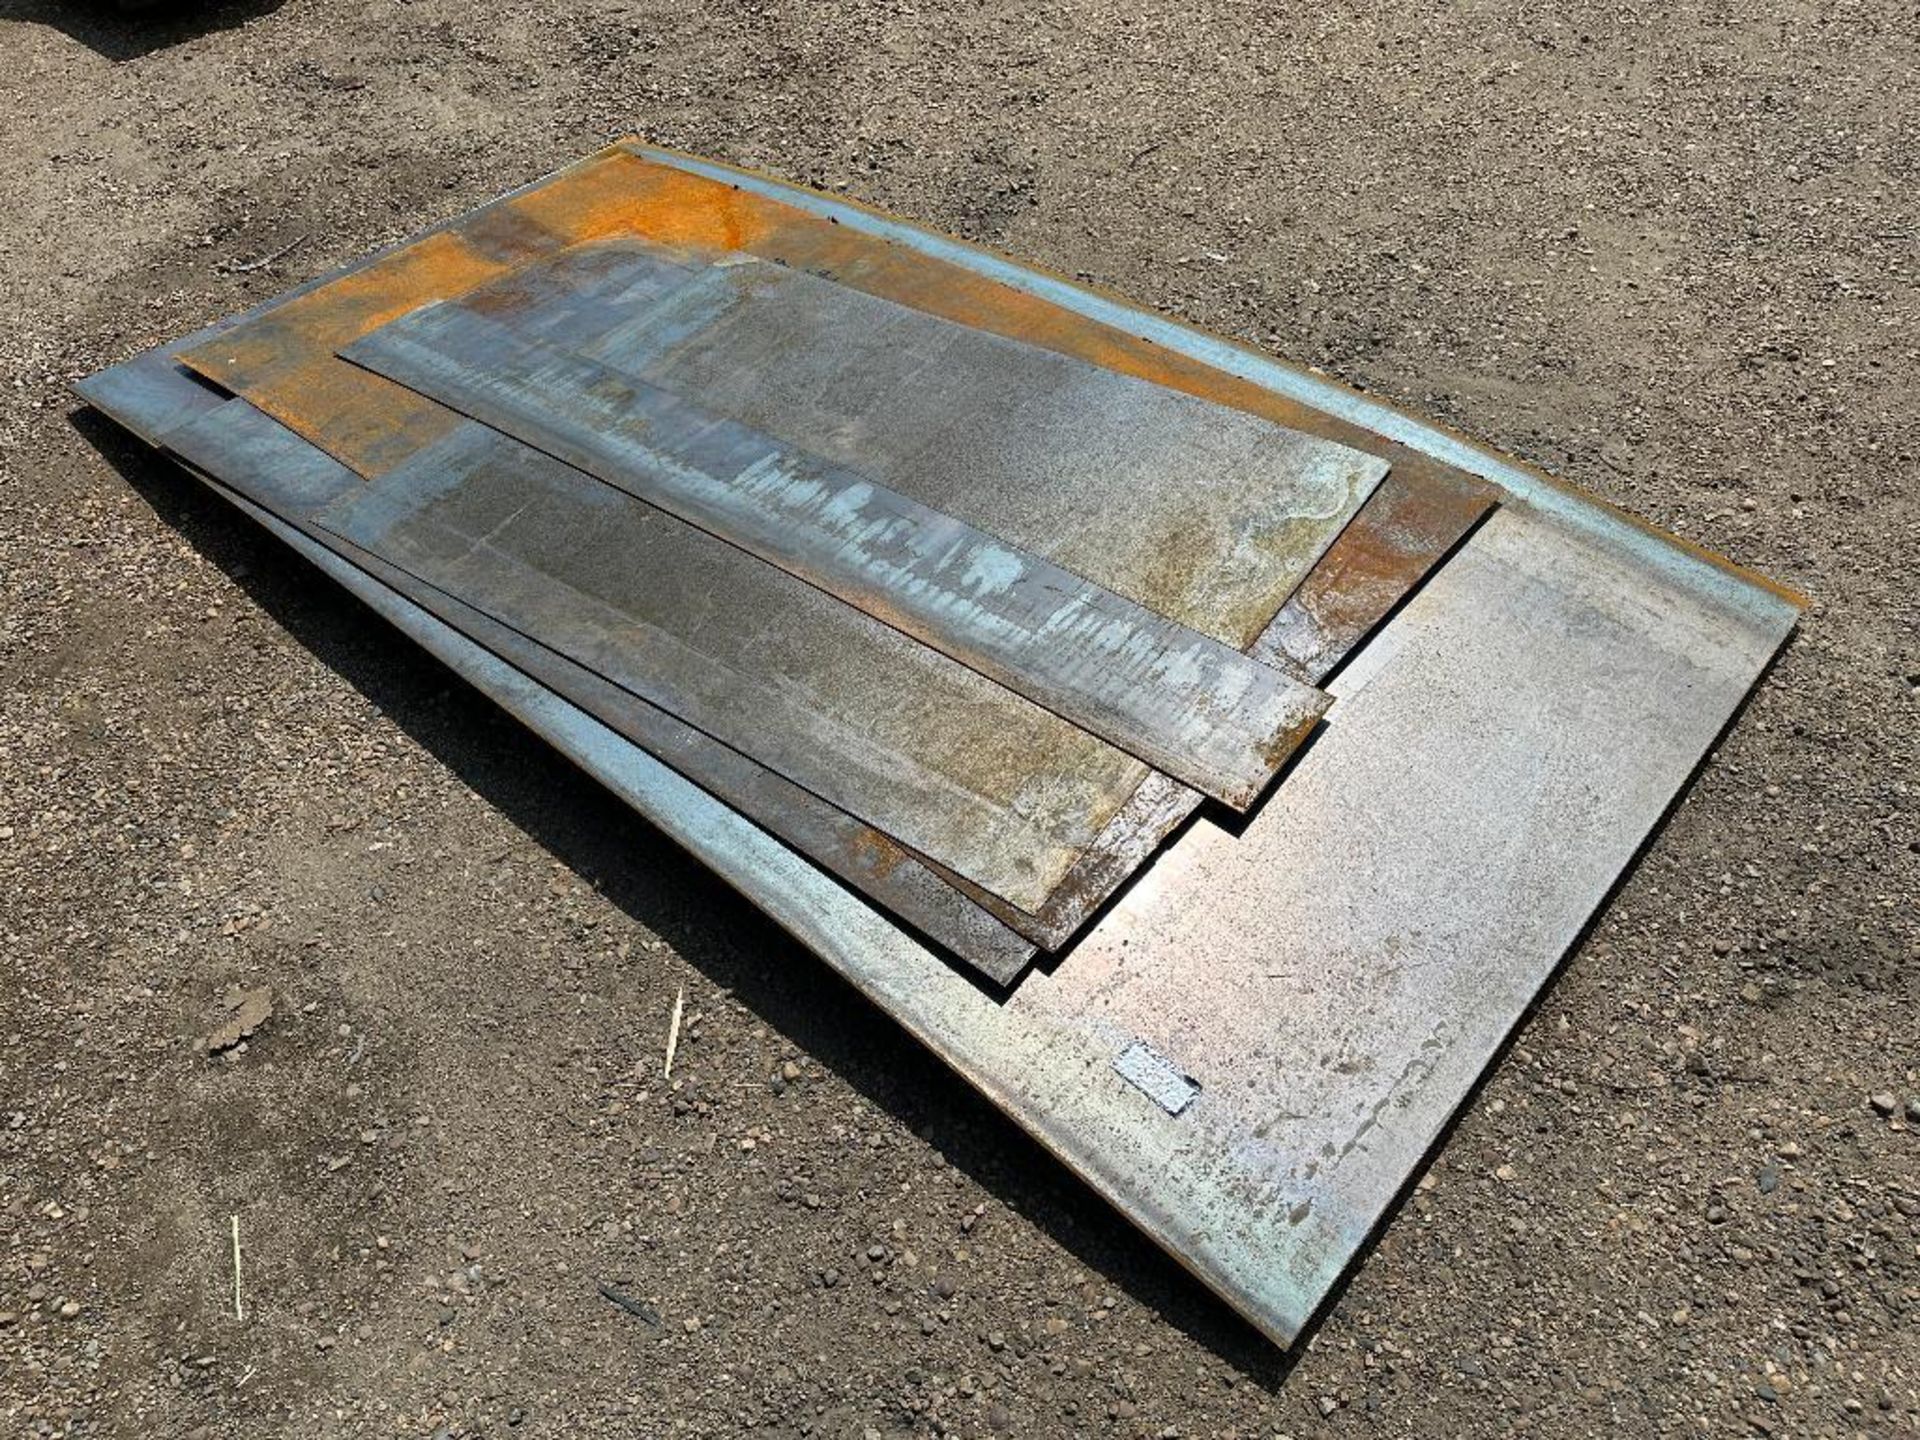 Lot of Asst. Plate Steel including (2) 5’x10’ Sheets and Asst. Cut-Offs - Image 2 of 3